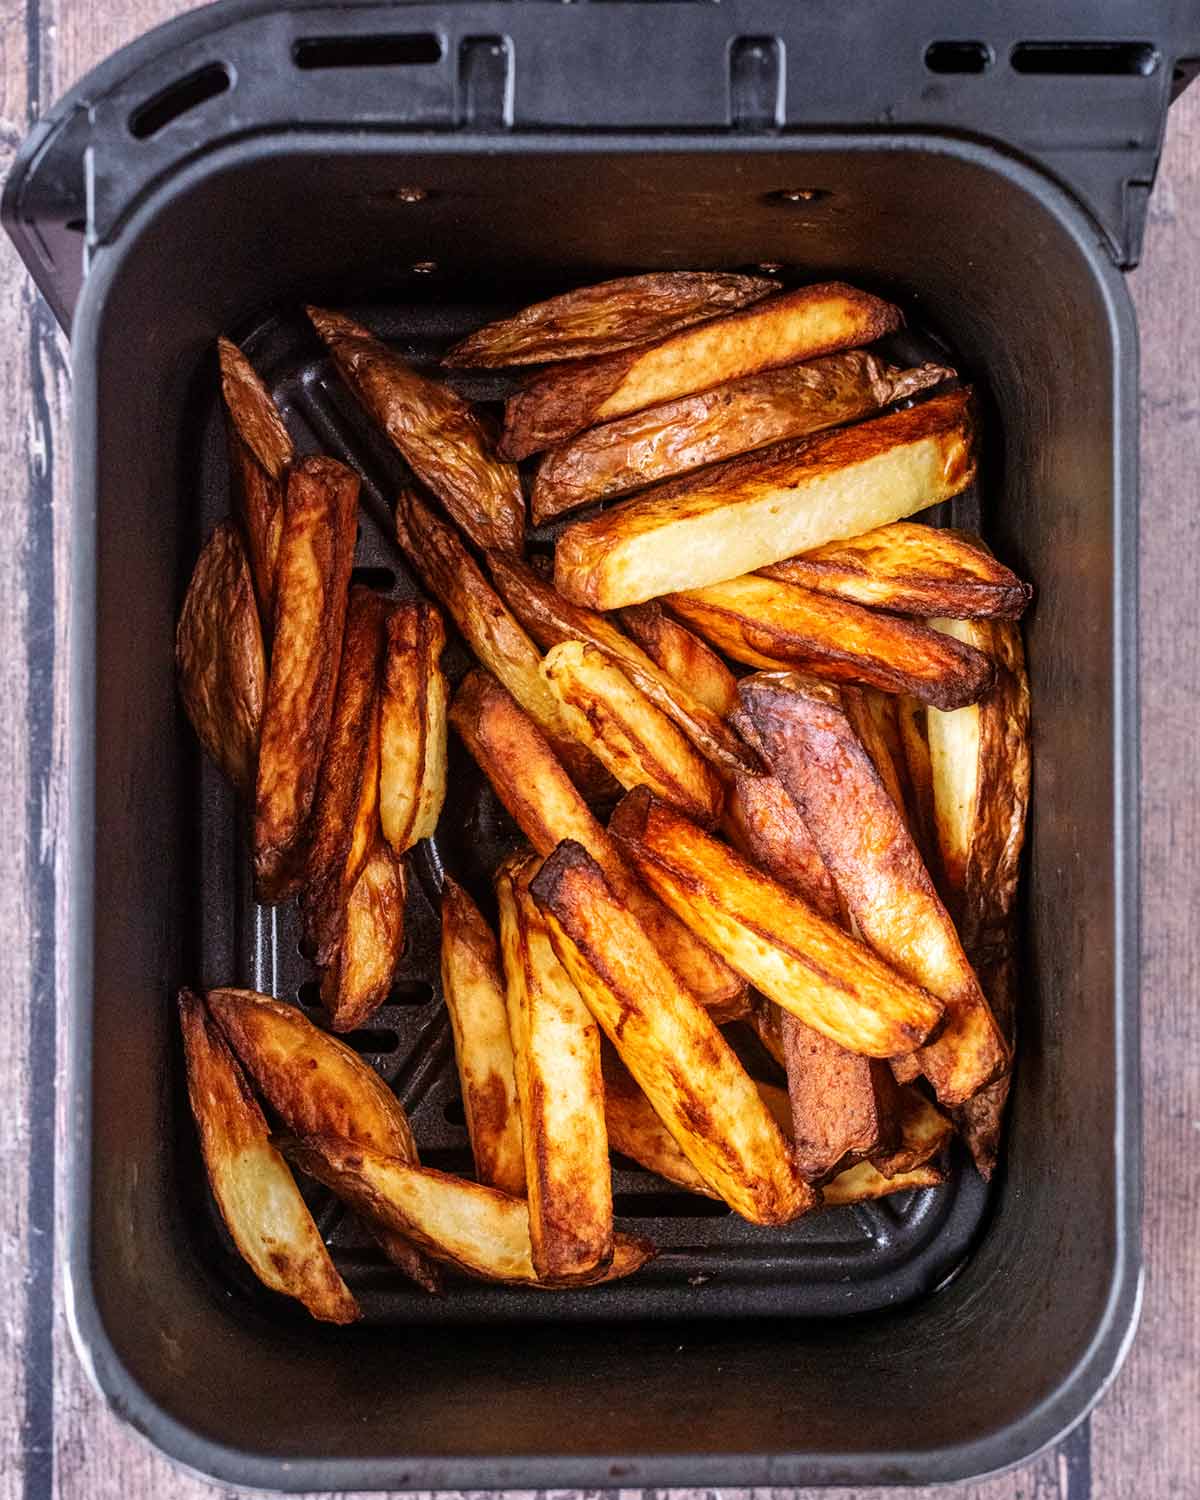 Cooked chips in an air fryer basket.